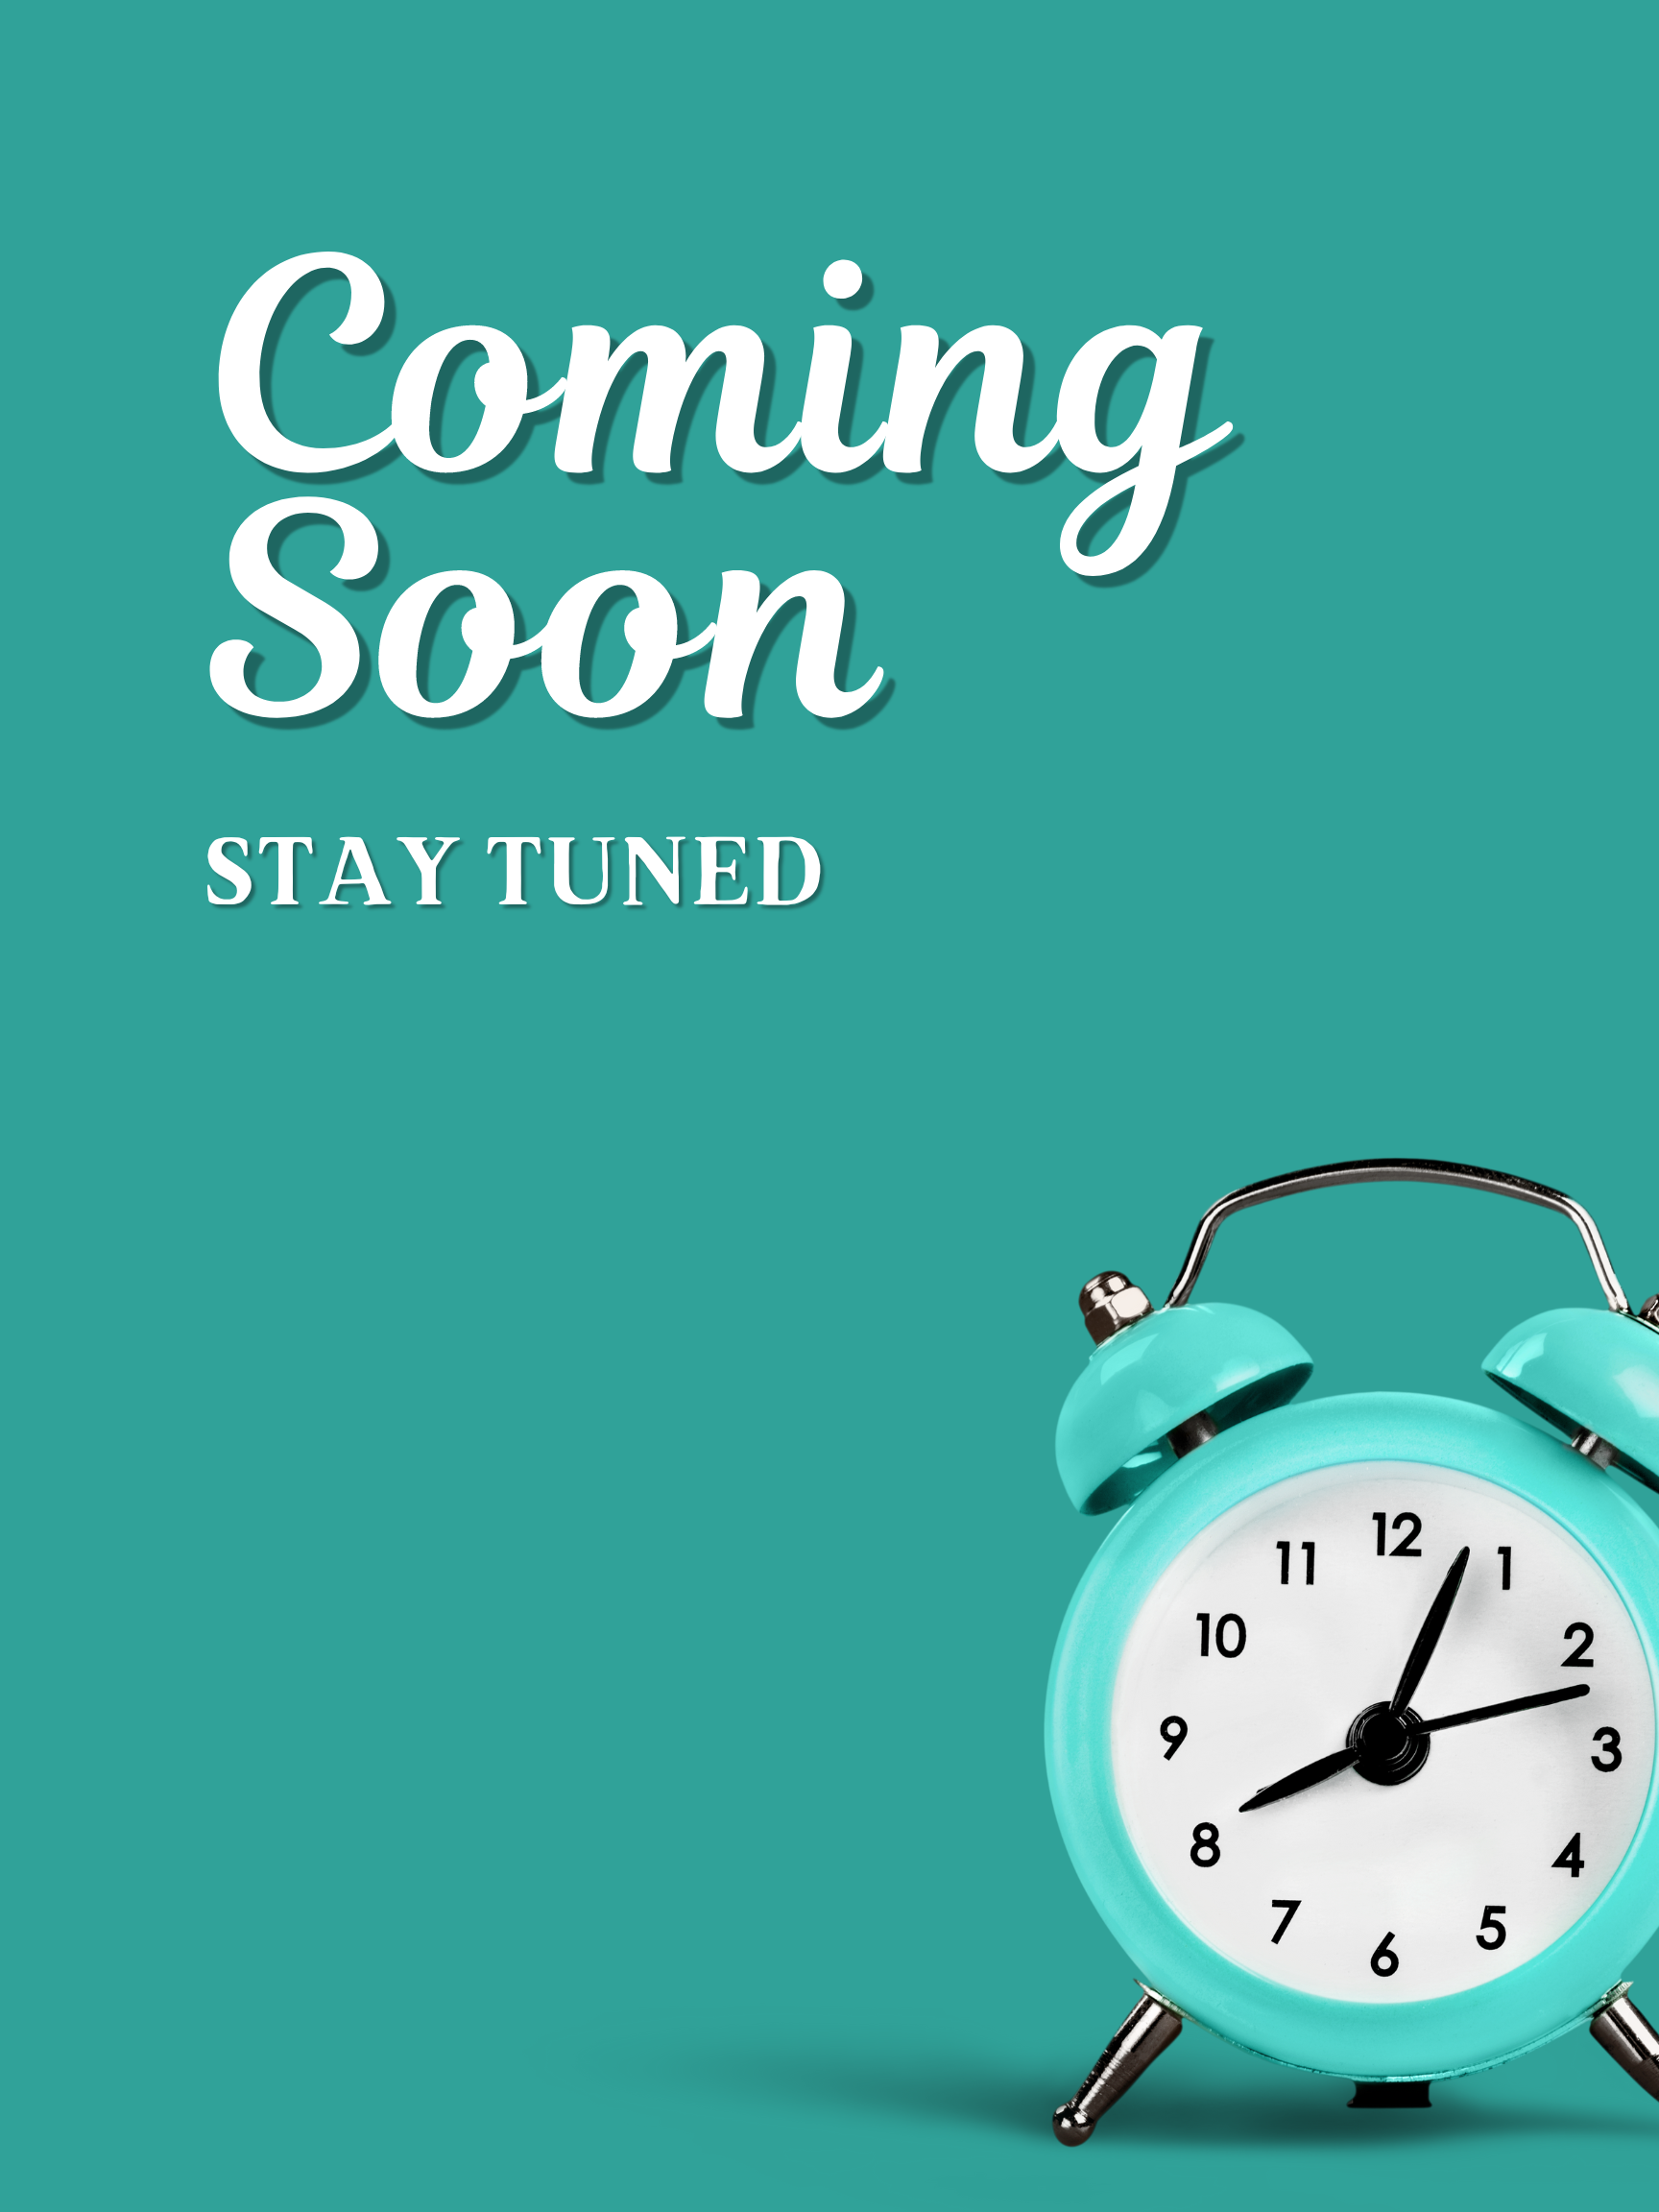 Coming soon stay tuned with alarm clock